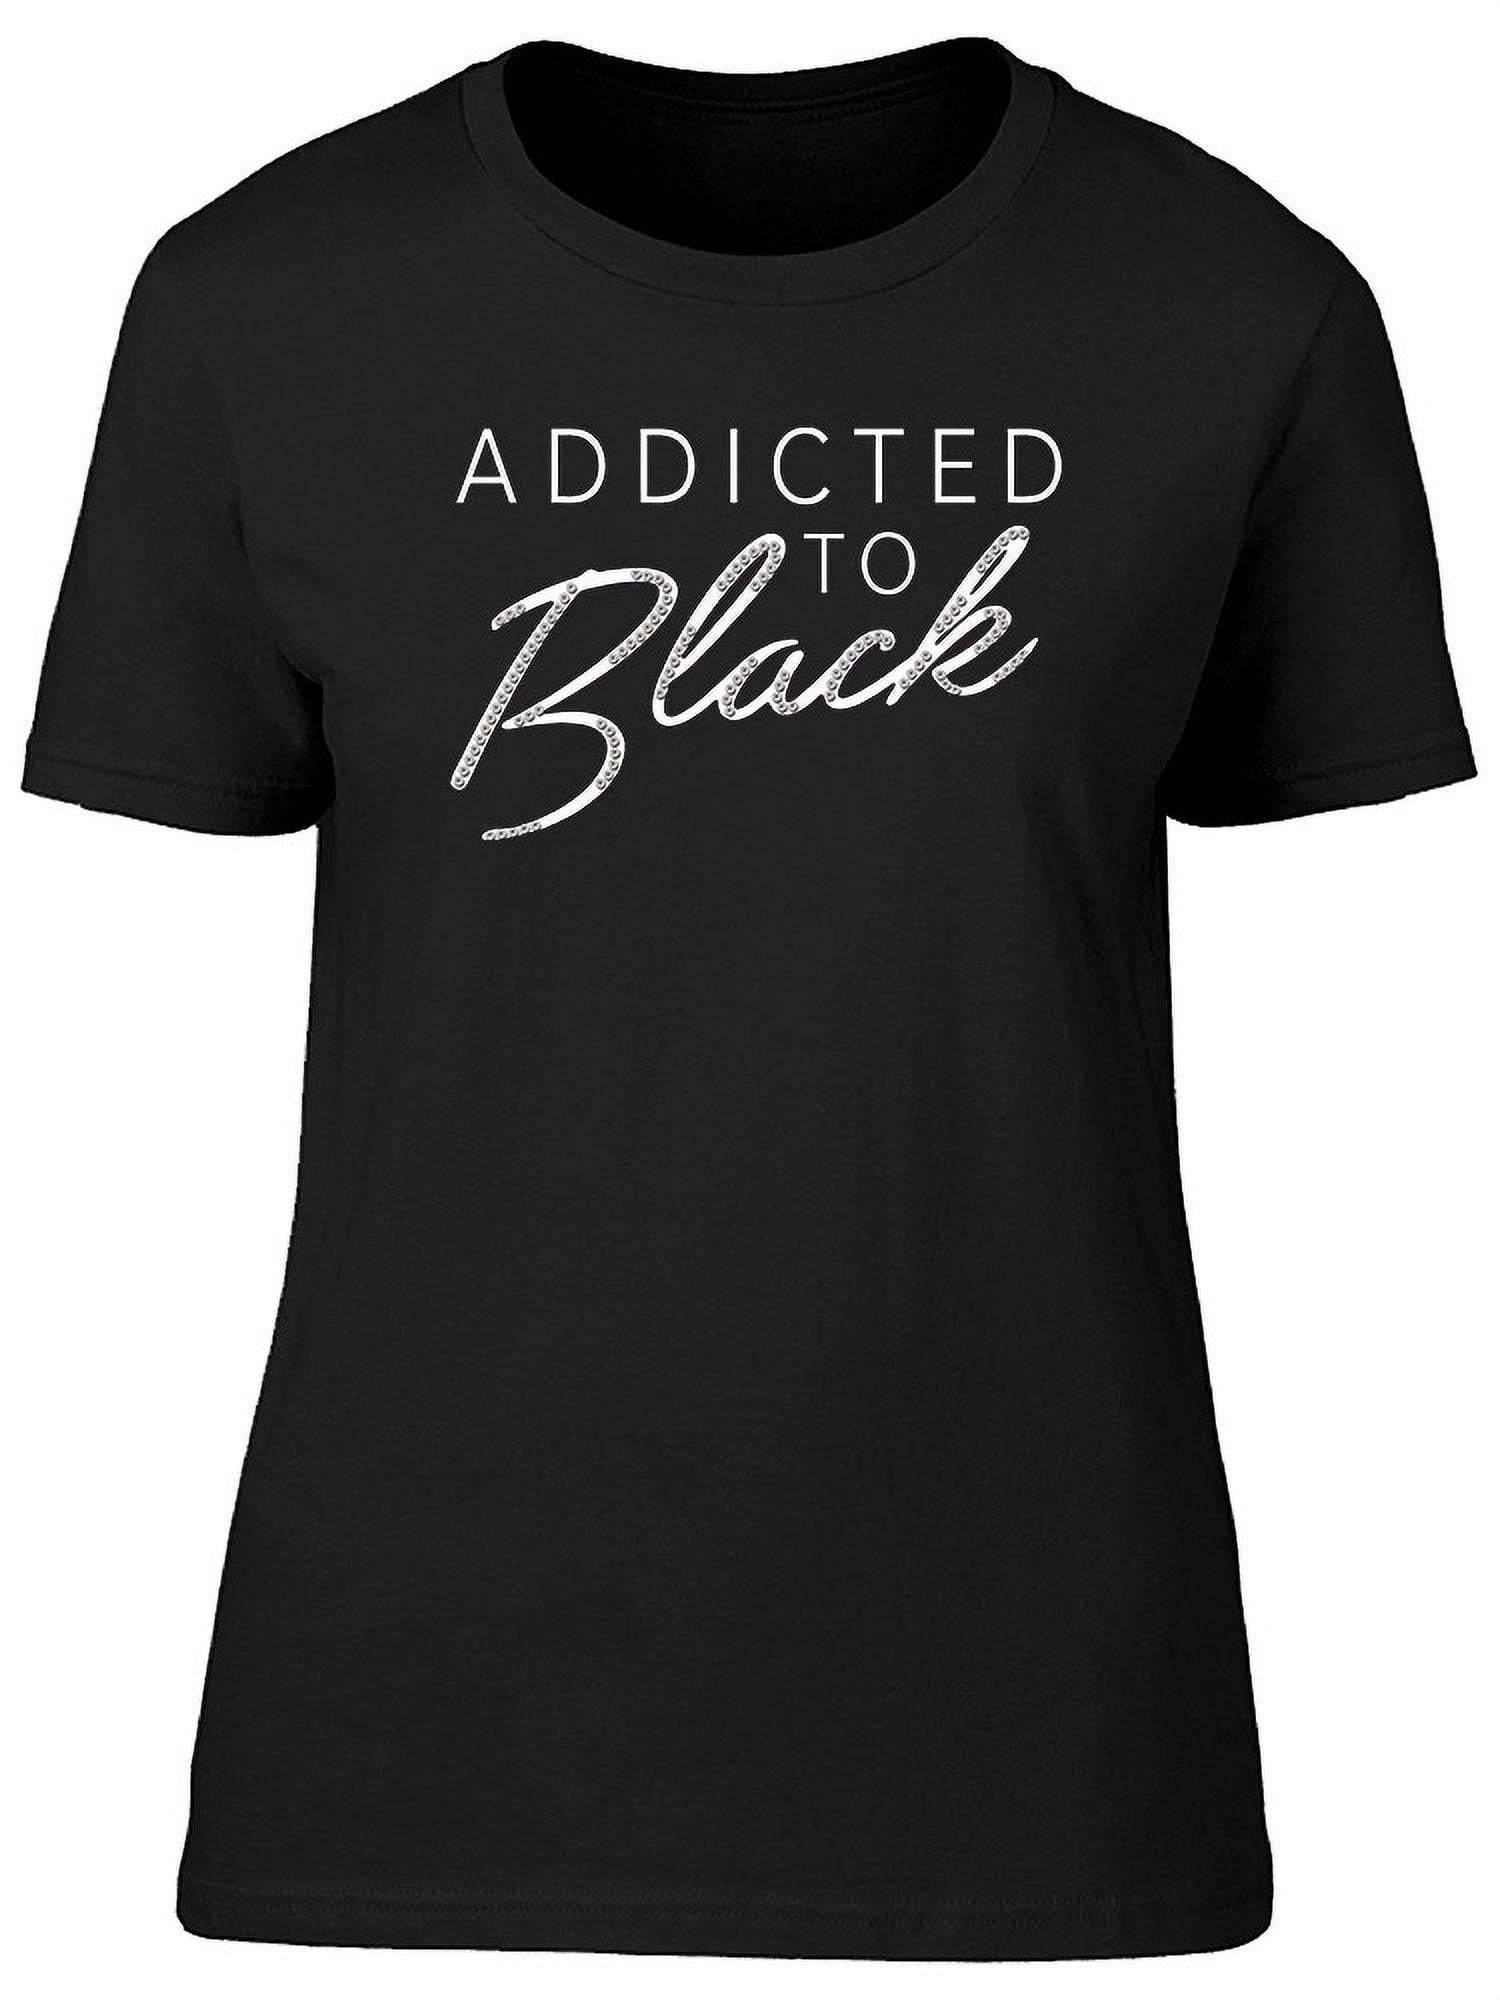 To Black Lettering T-Shirt Women -Image by Female x-Large Walmart.com